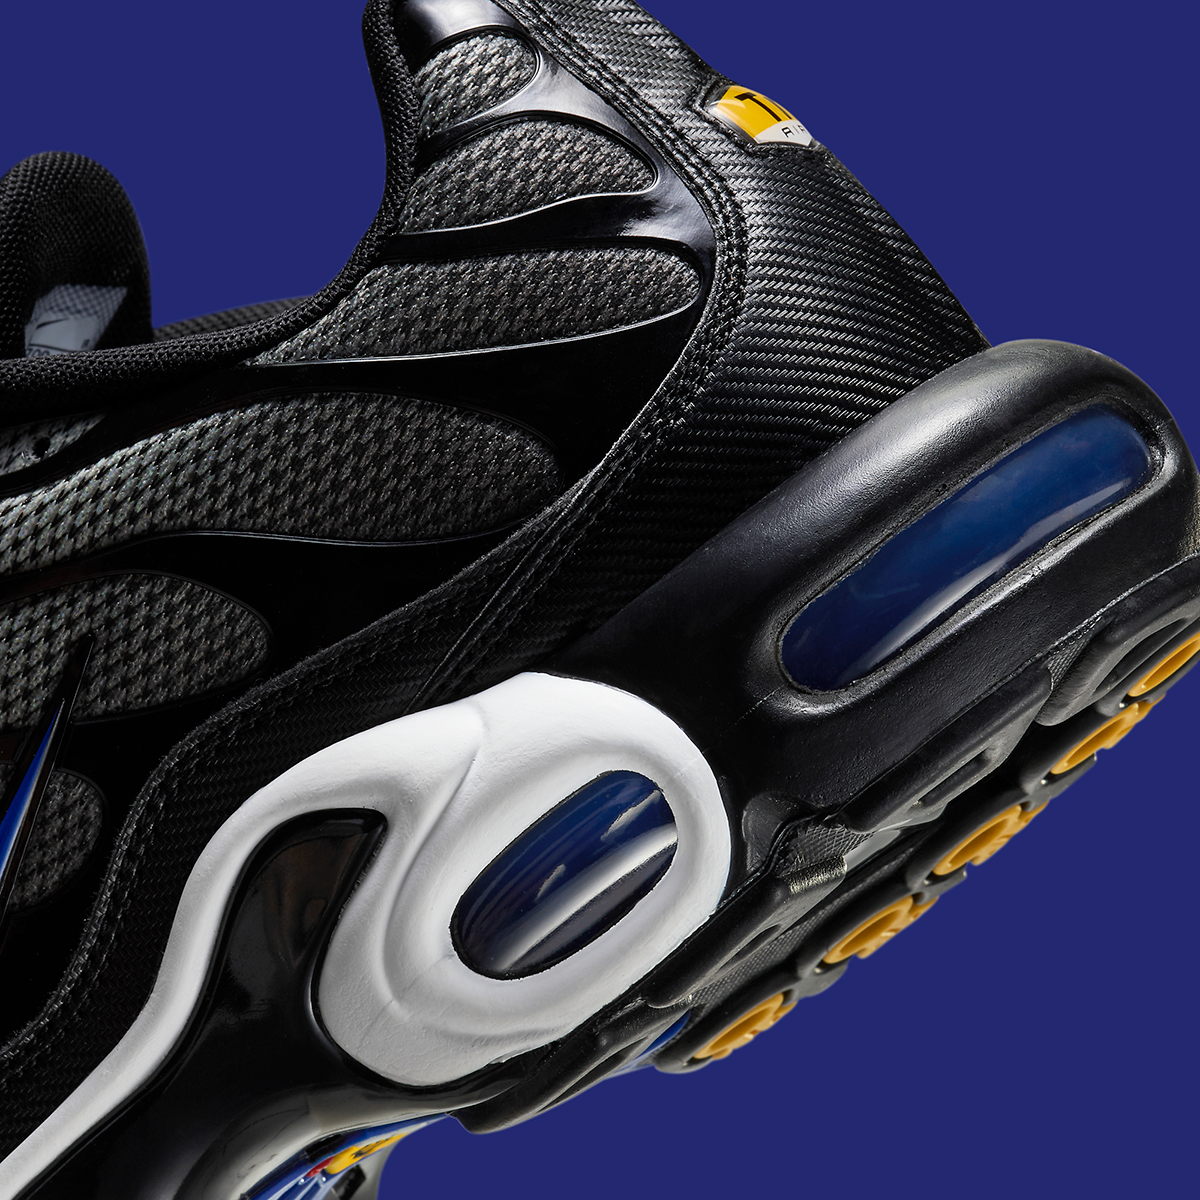 Nike nike air griffey 1 women boots sale on ebay Black Anthracite Racer Blue Hm0709 100 3